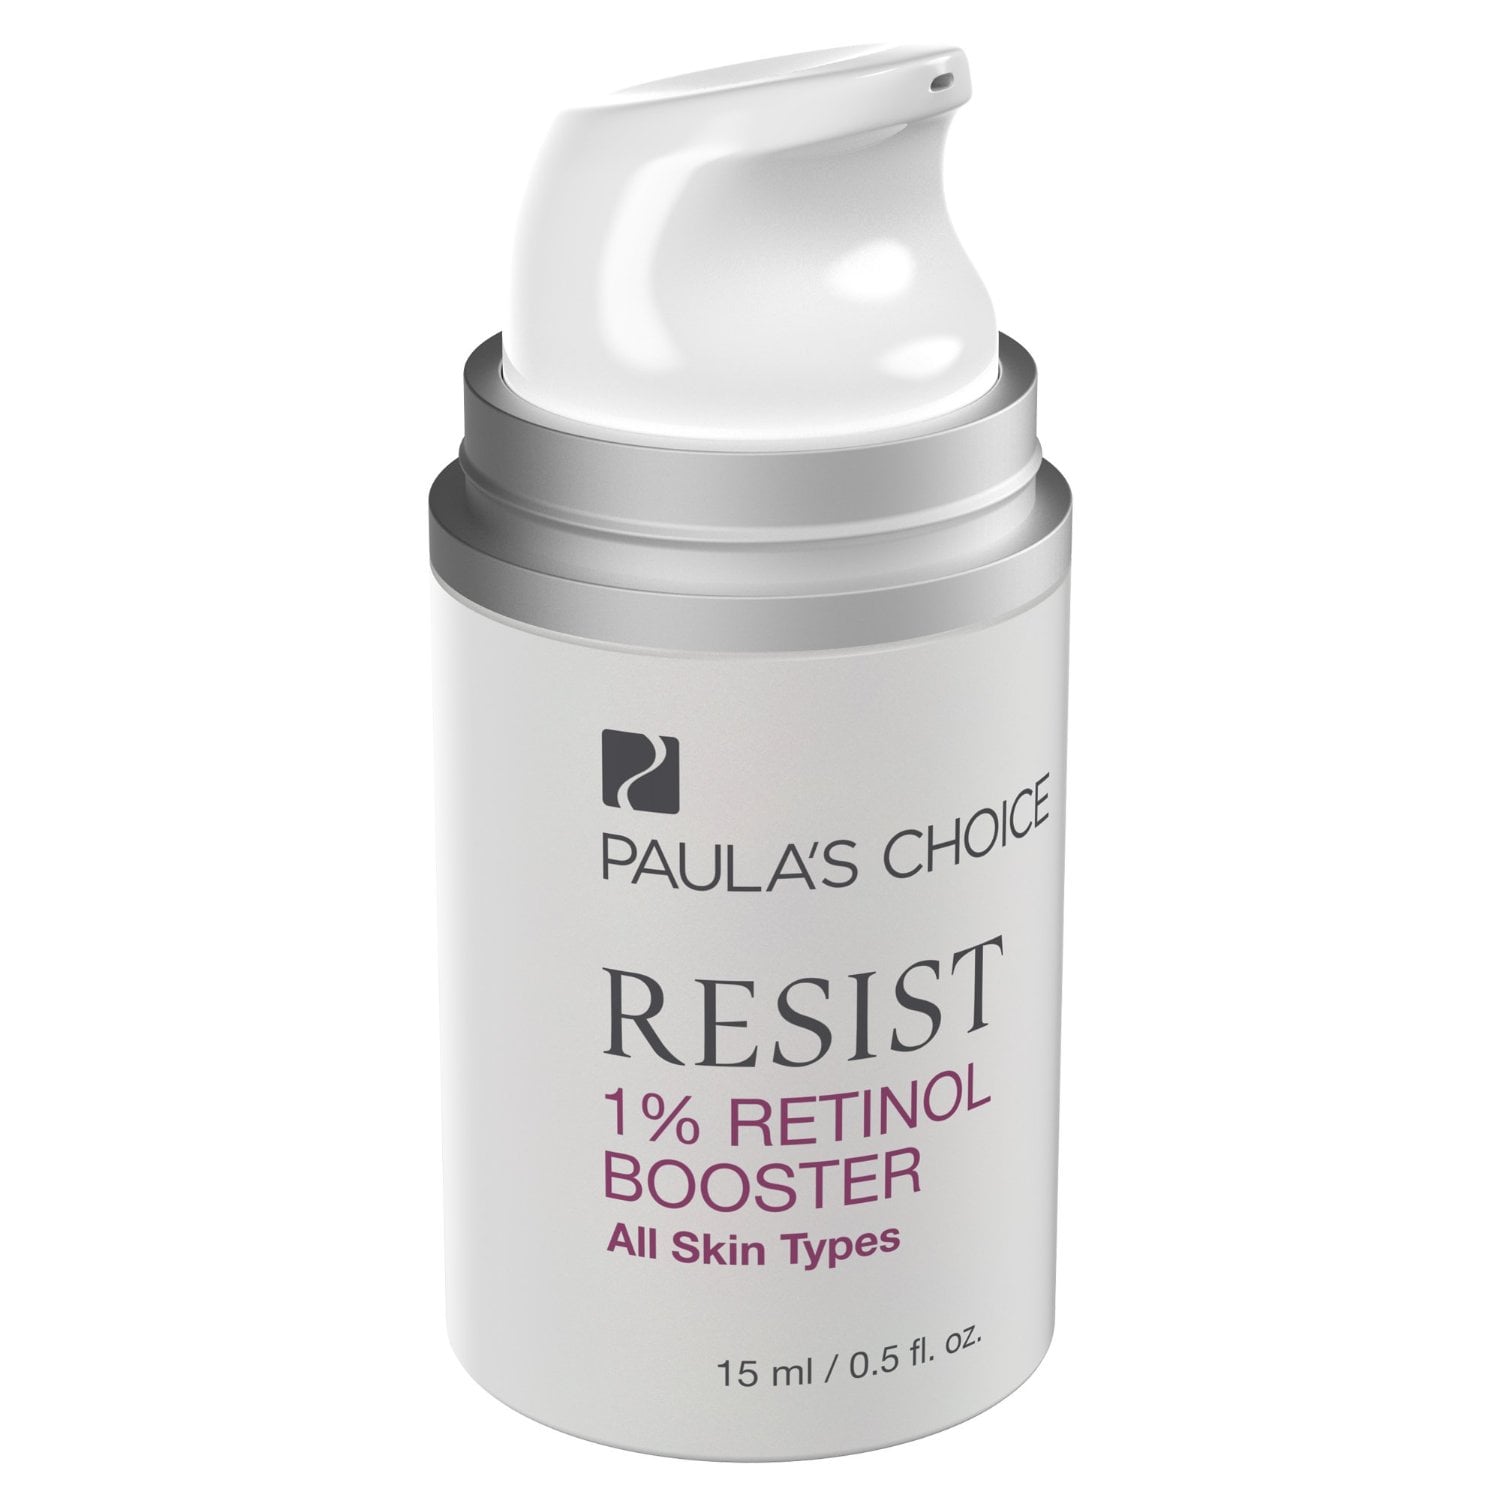 Paula's Choice Resist 1% Retinol Booster | Your Skin Care Routine For Fall With Easy Booster Drops | POPSUGAR Beauty Photo 6